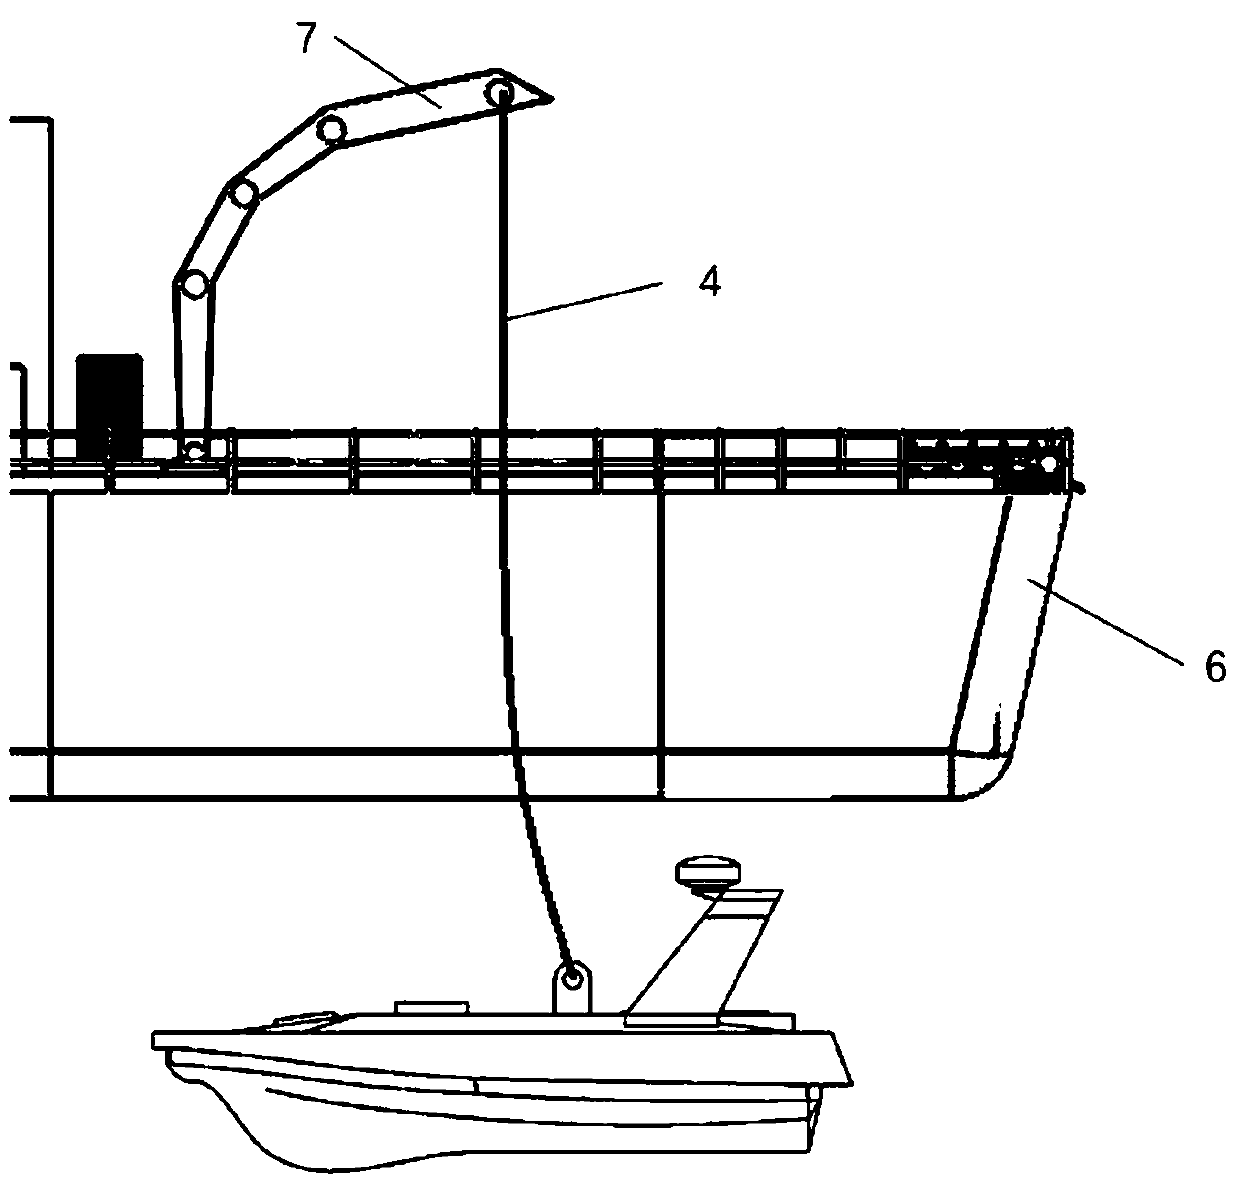 System for recycling unmanned boat assisted by unmanned aerial vehicle